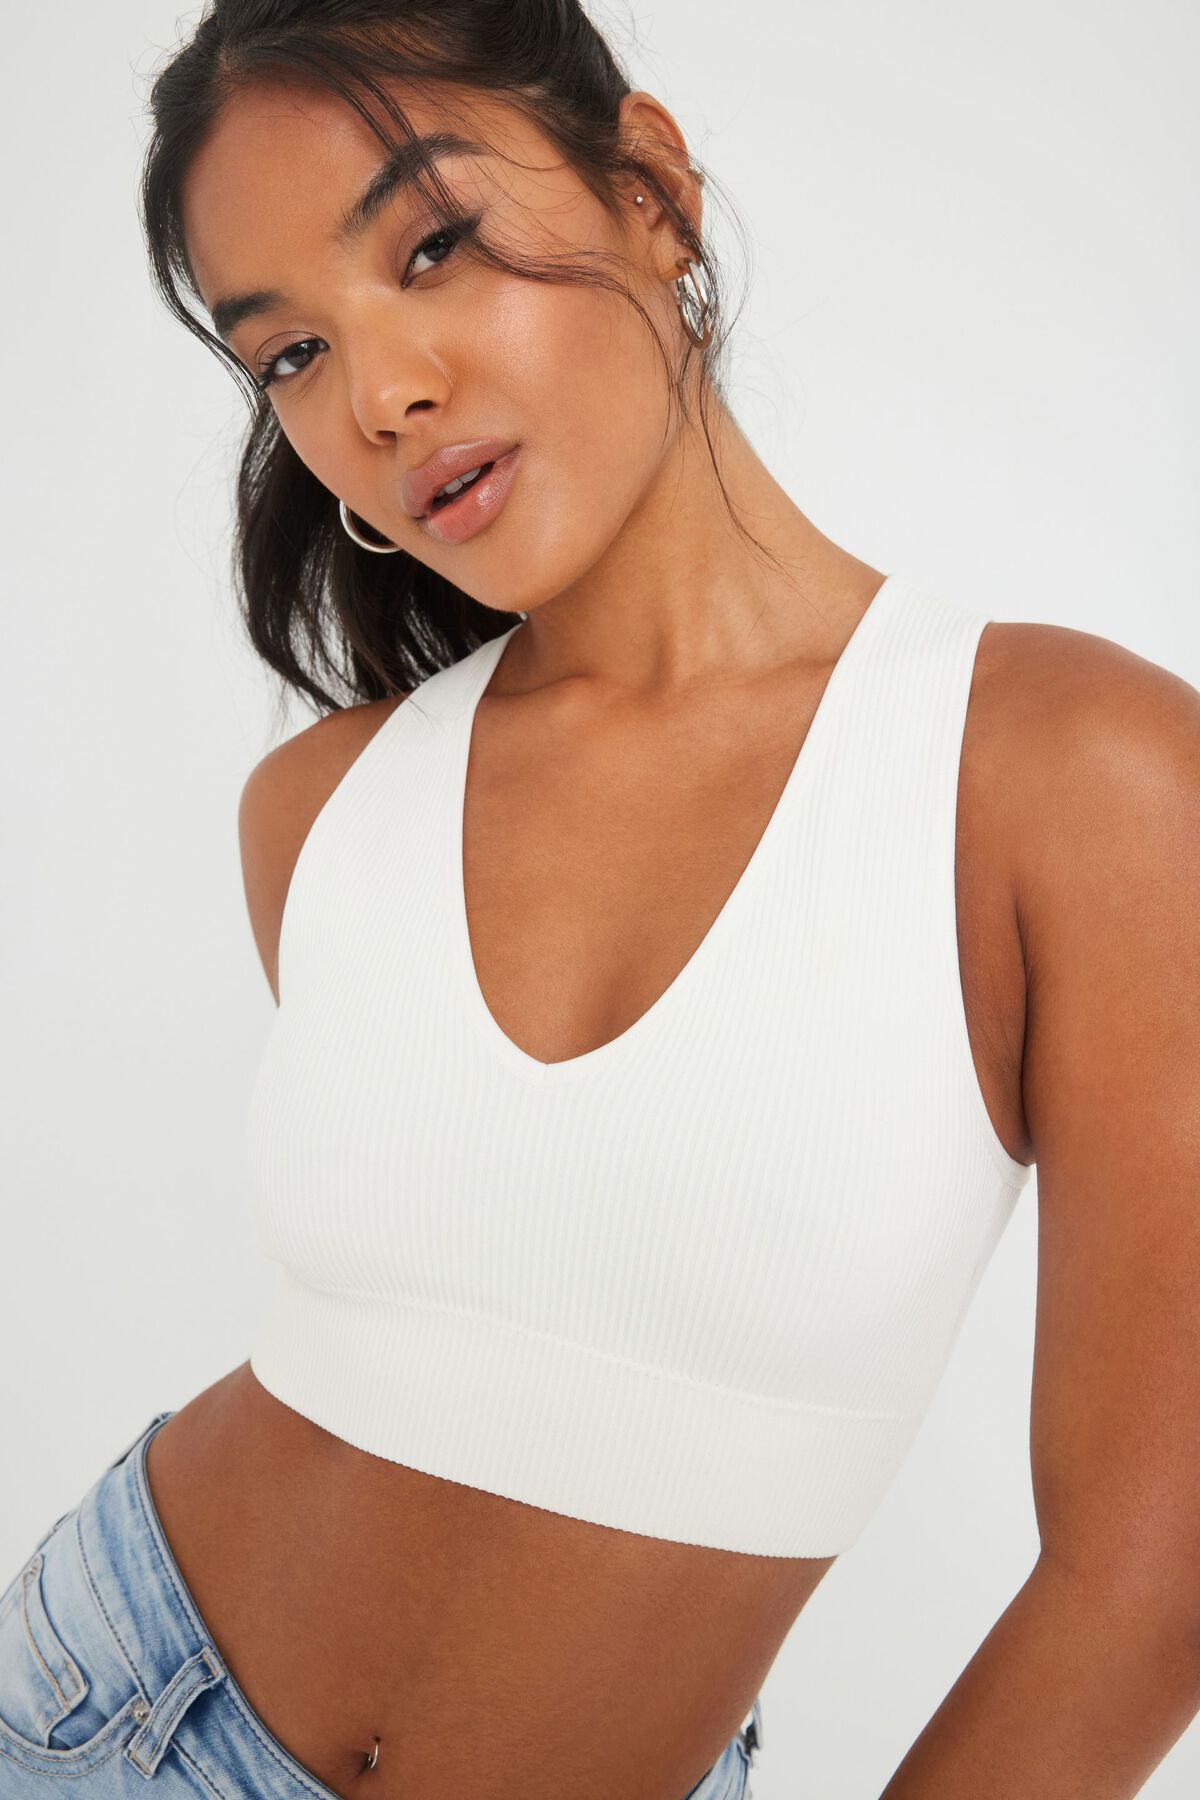 Generic Summer Crop Tops Sexy Spaghetti Strap Tanke Top Women Built In Bra  Off Shoulder Solid Color Sleeveless Ins(#Light Grey) @ Best Price Online